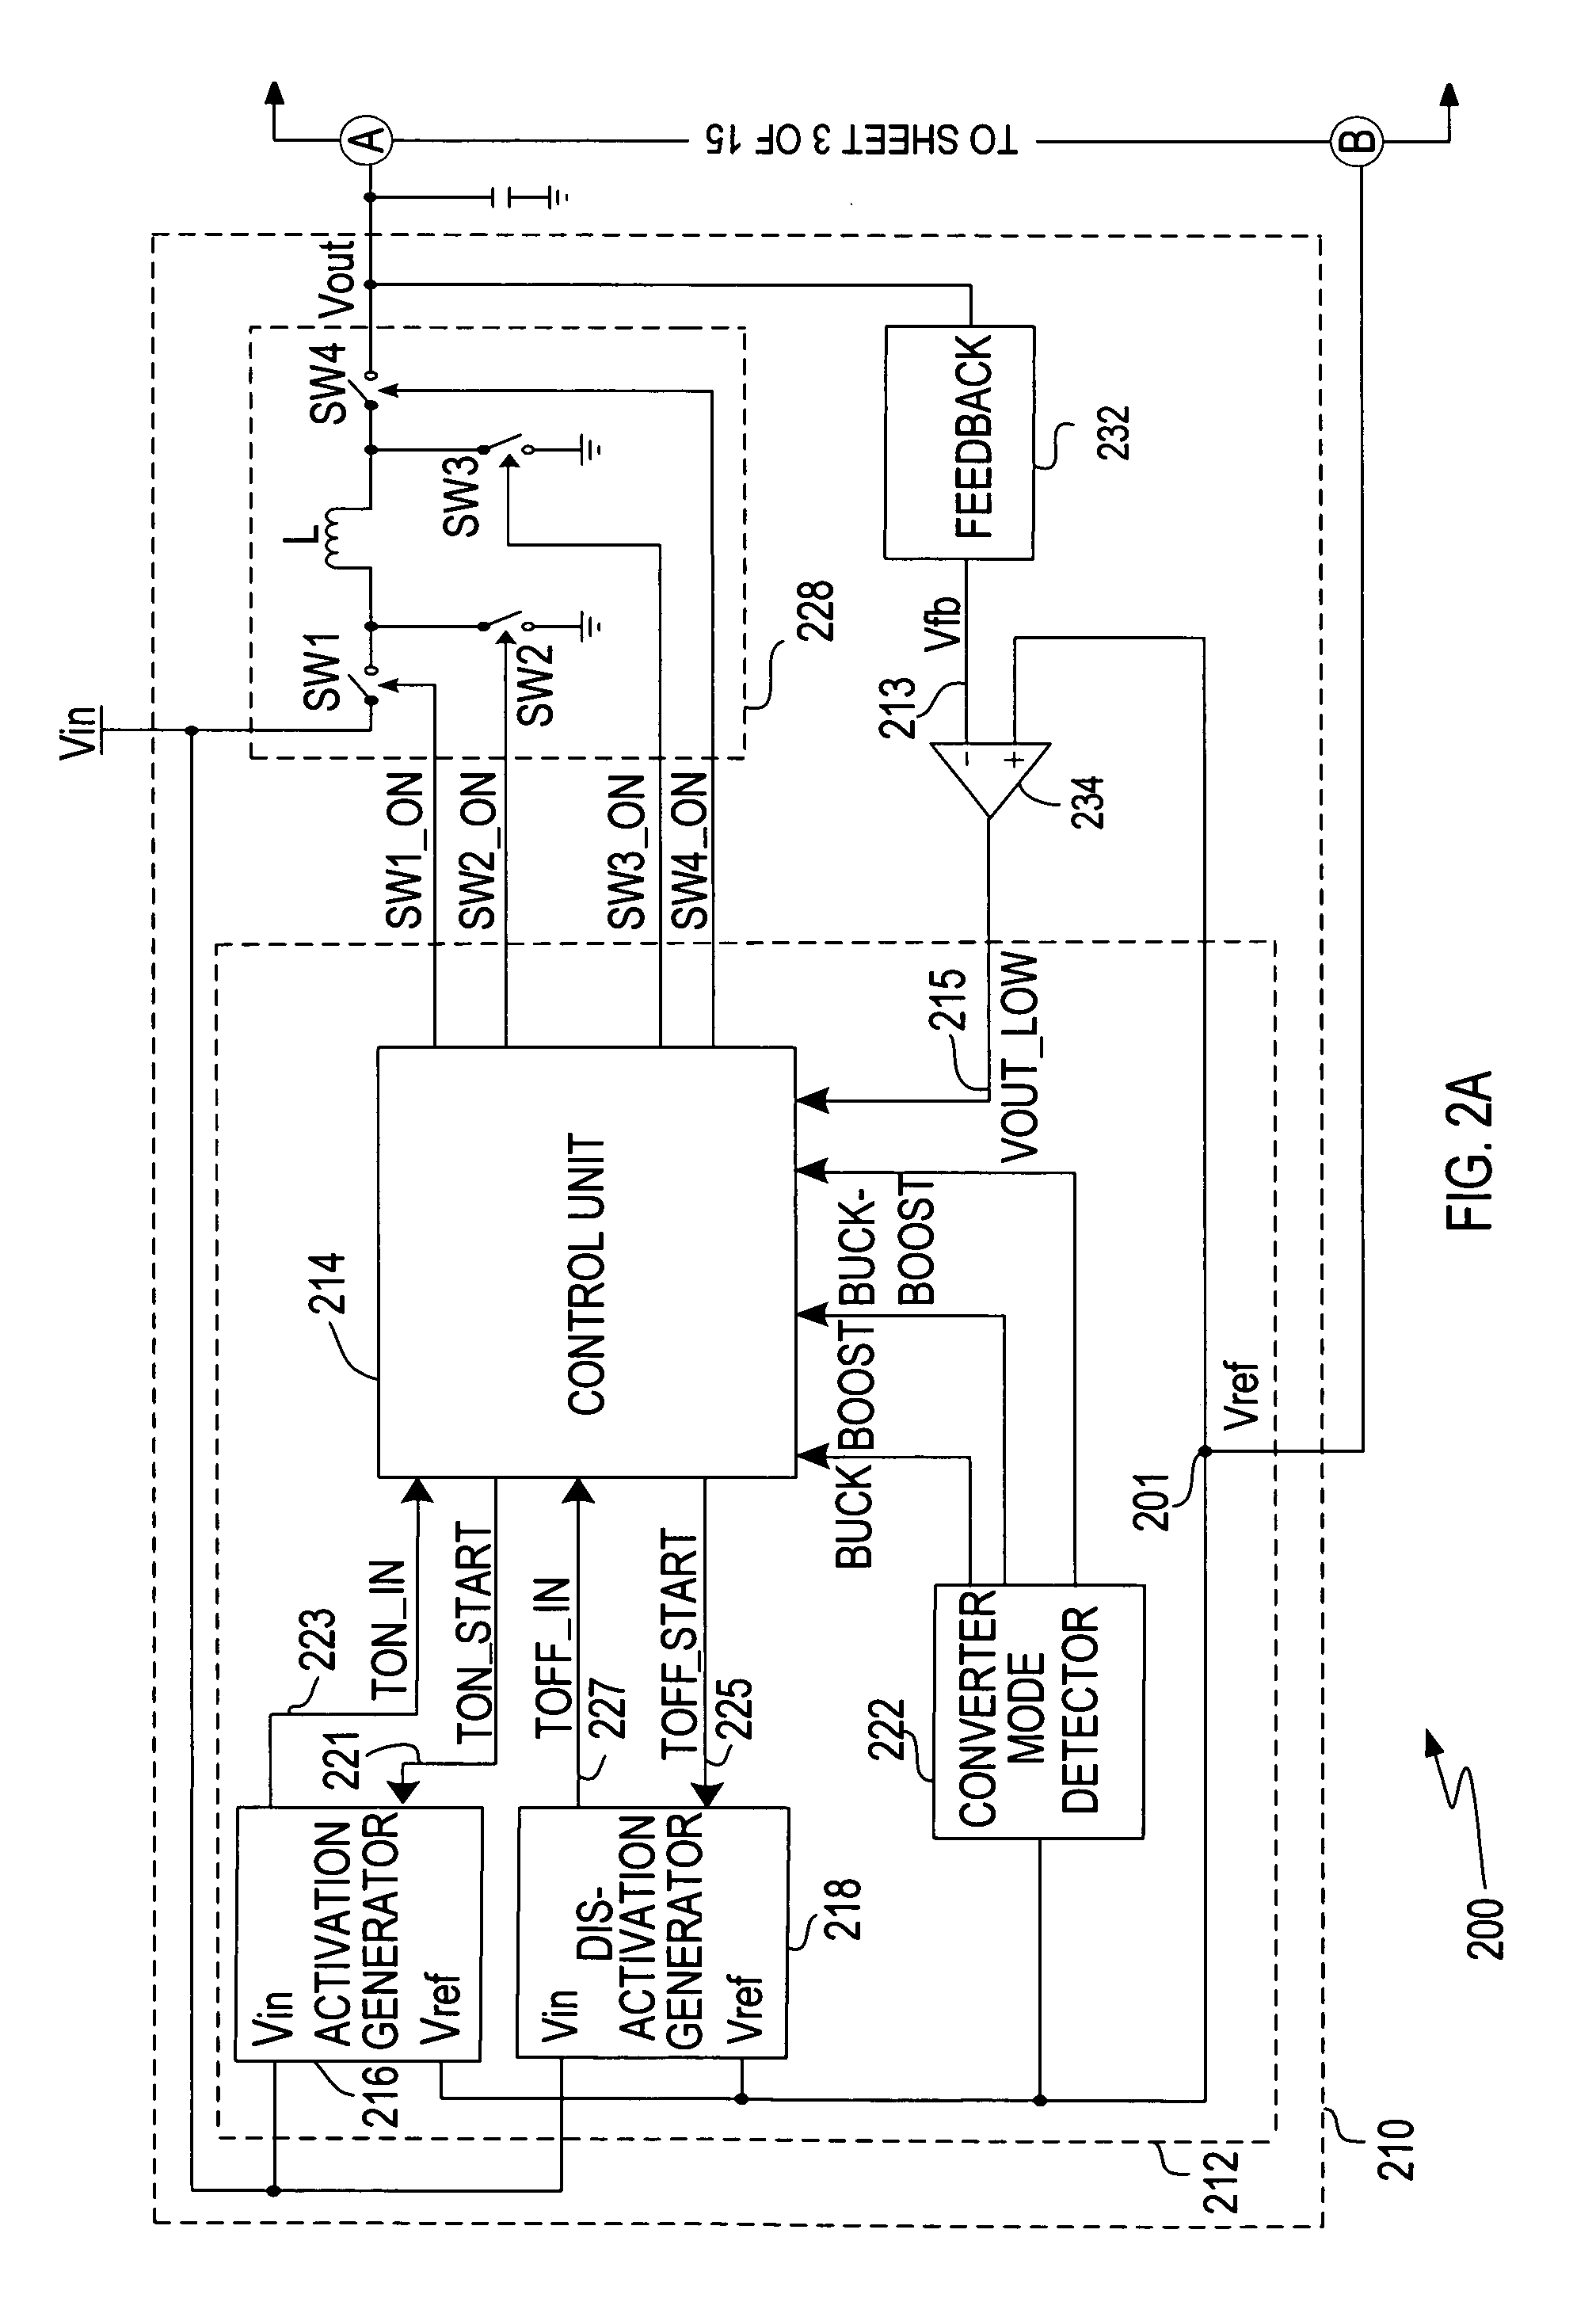 Apparatus and method for regulating white LEDs